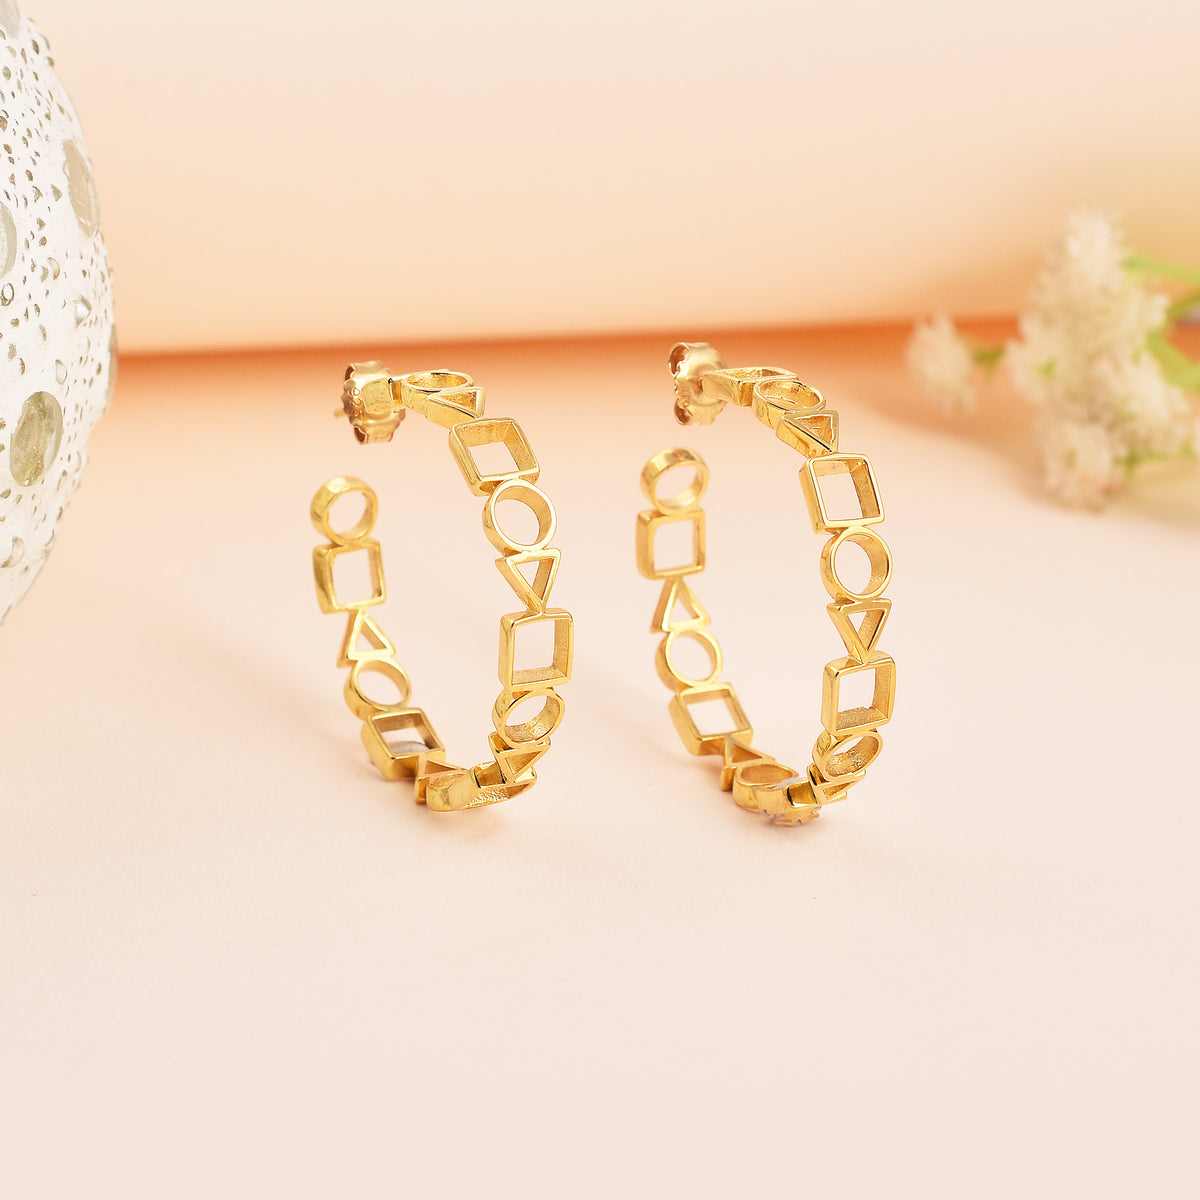 925 Sterling Silver Fun Love Gold Plated Hoop Earrings Gift for Her